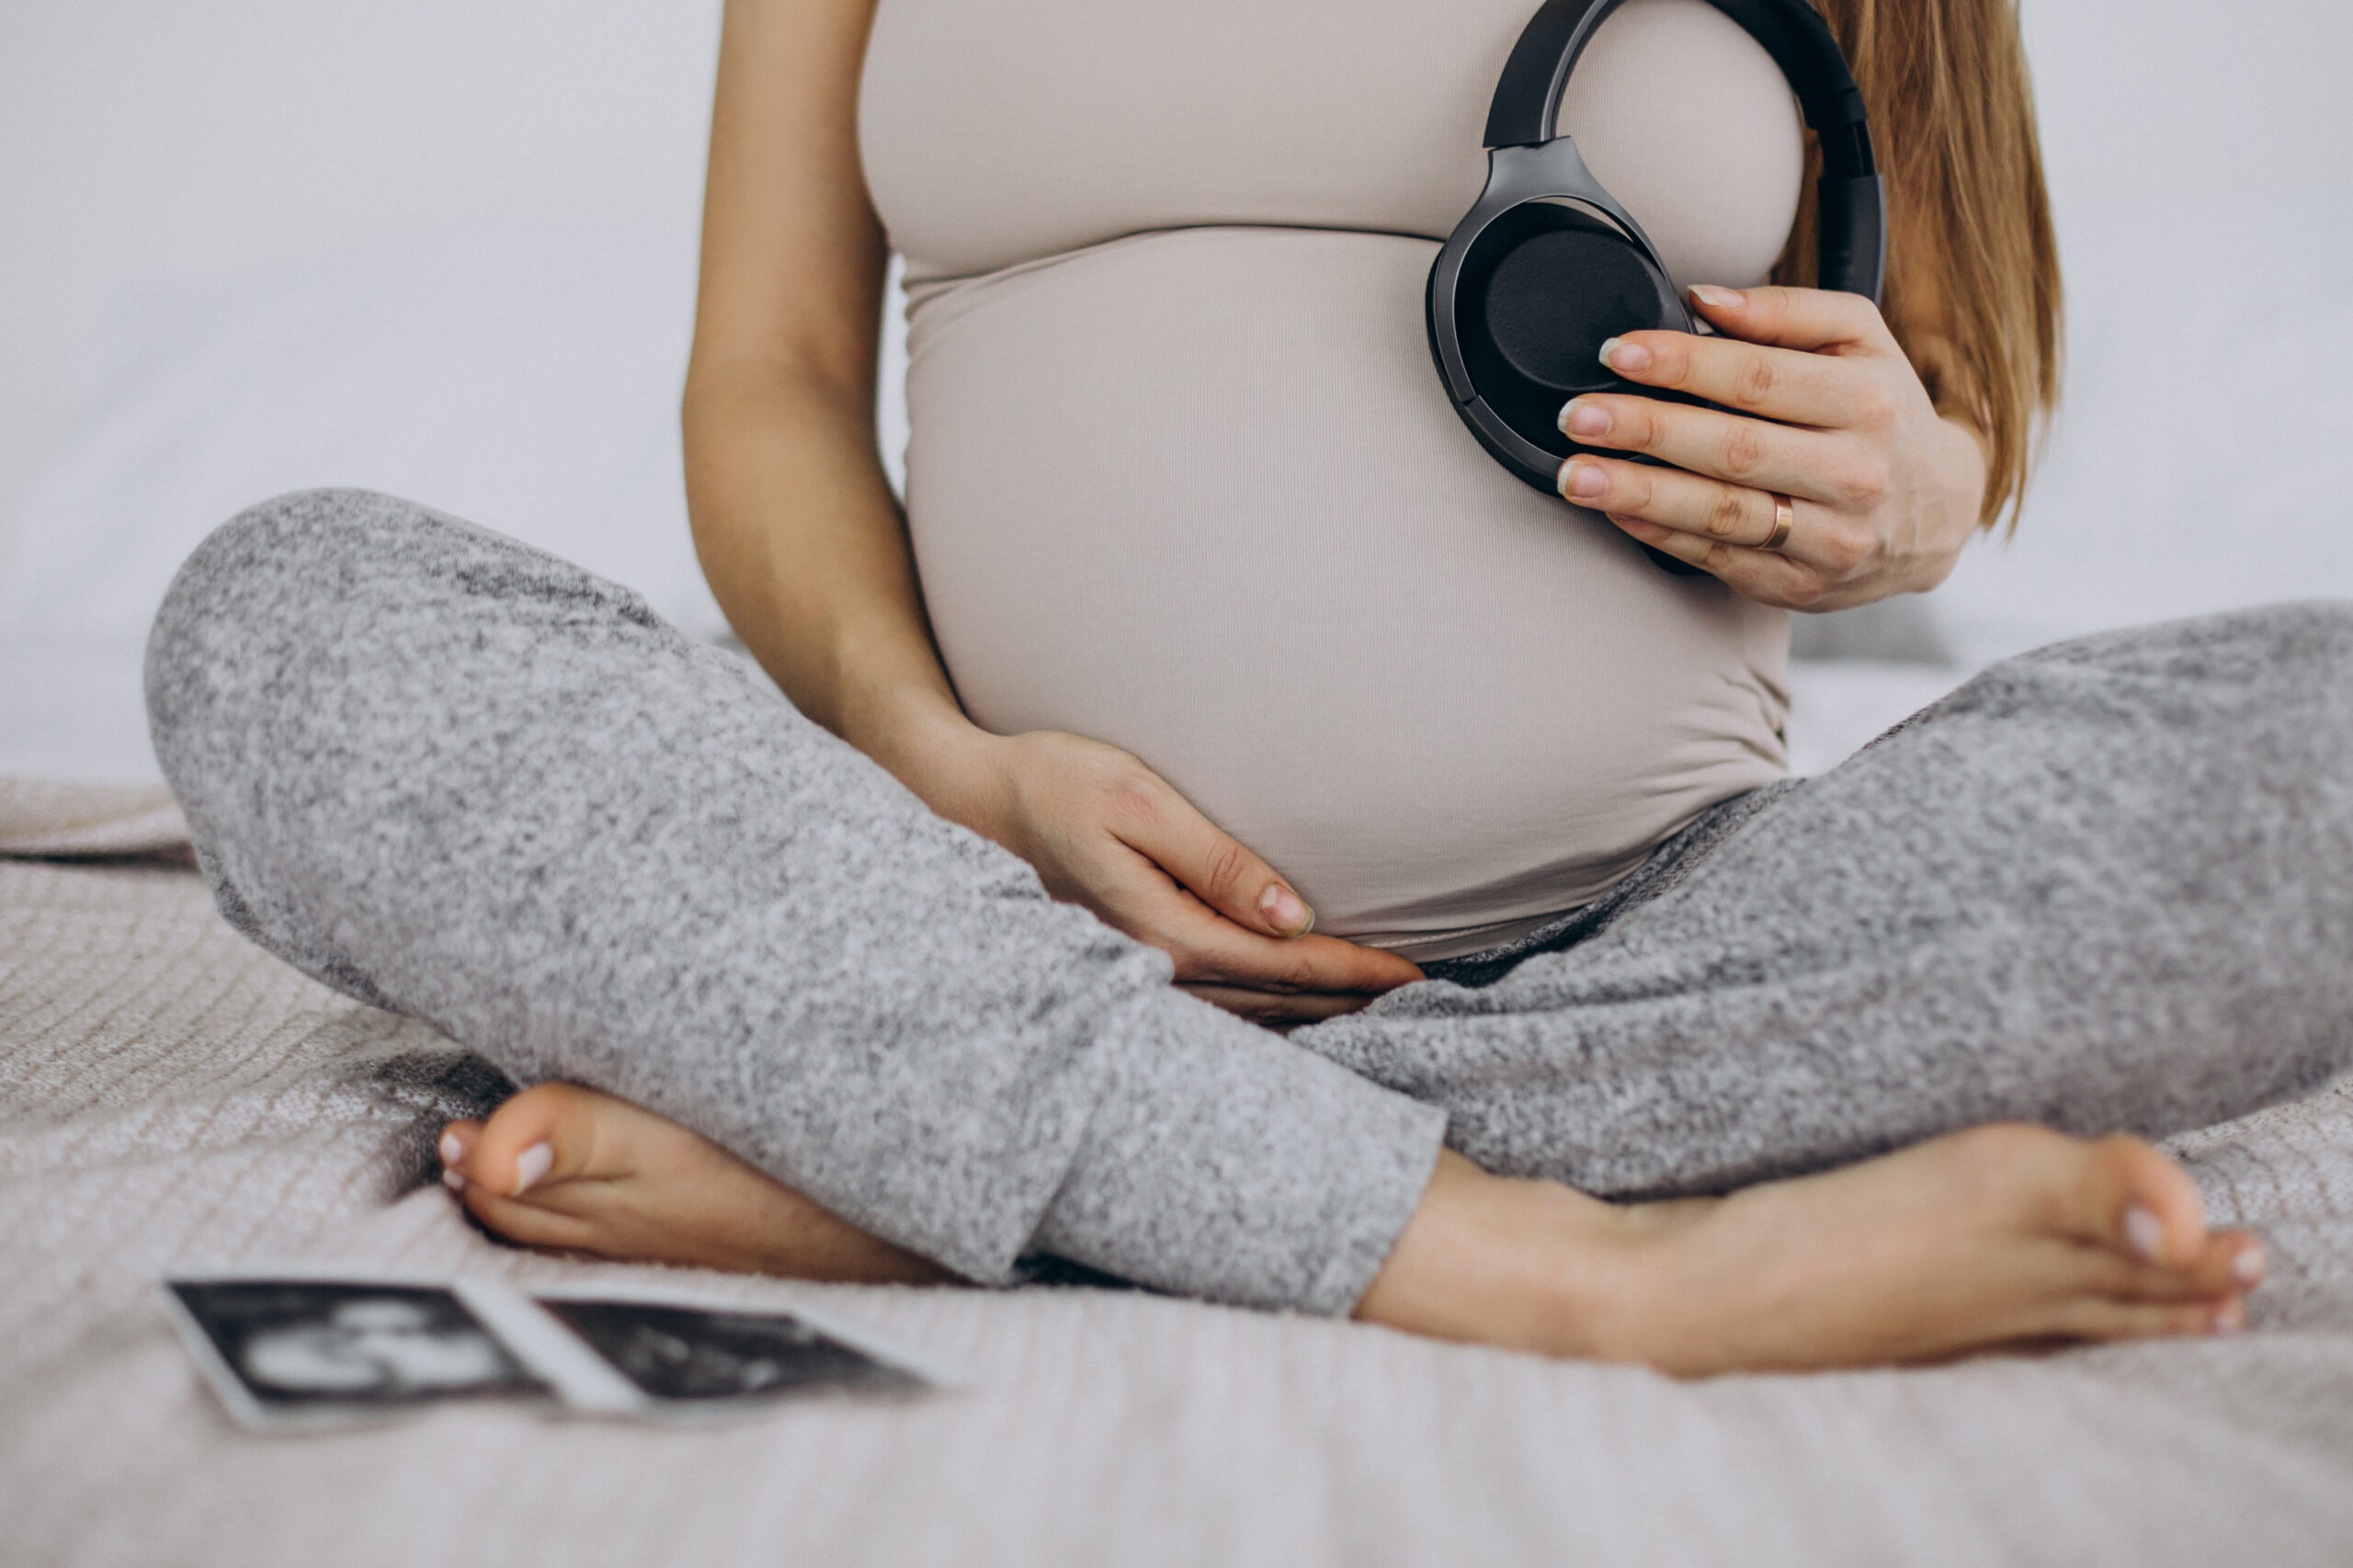 Pregnant woman with ultrasound photo putting headphones with music on her belly